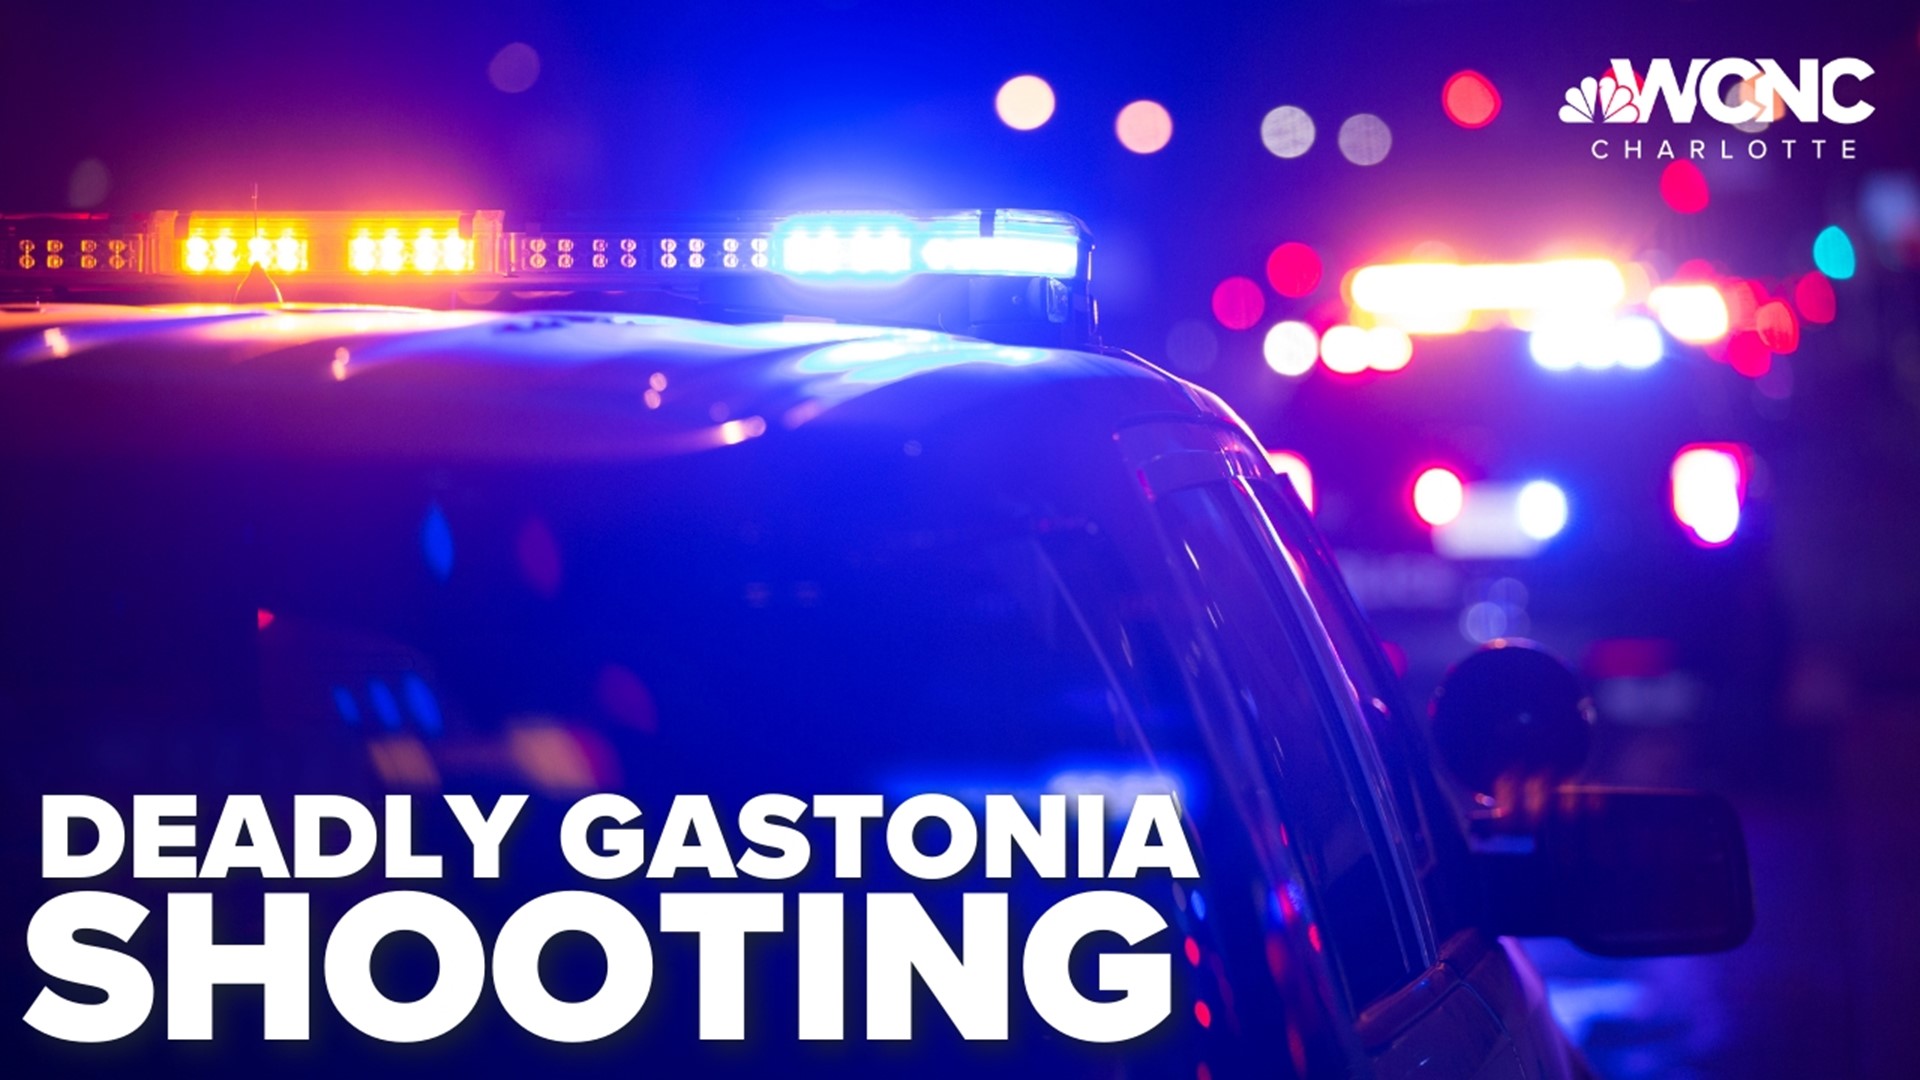 Gastonia police are on the scene of a shooting that took a woman's life.